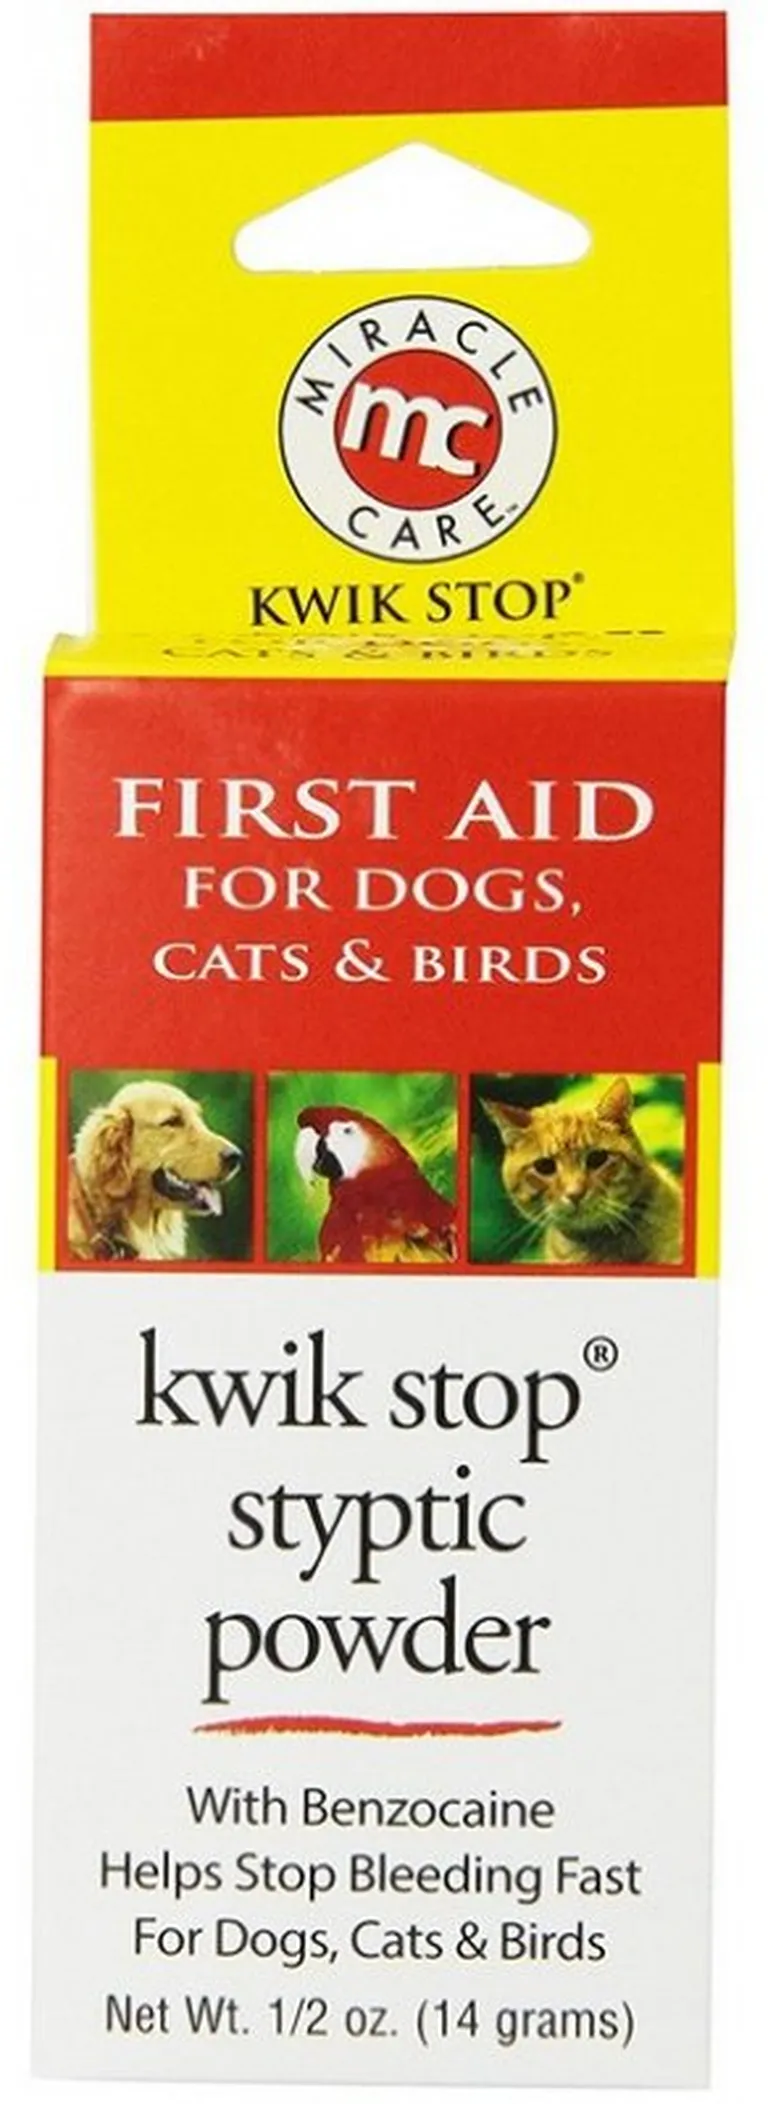 Miracle Care Kwik Stop Styptic Powder for Dogs, Cats and Birds Photo 1